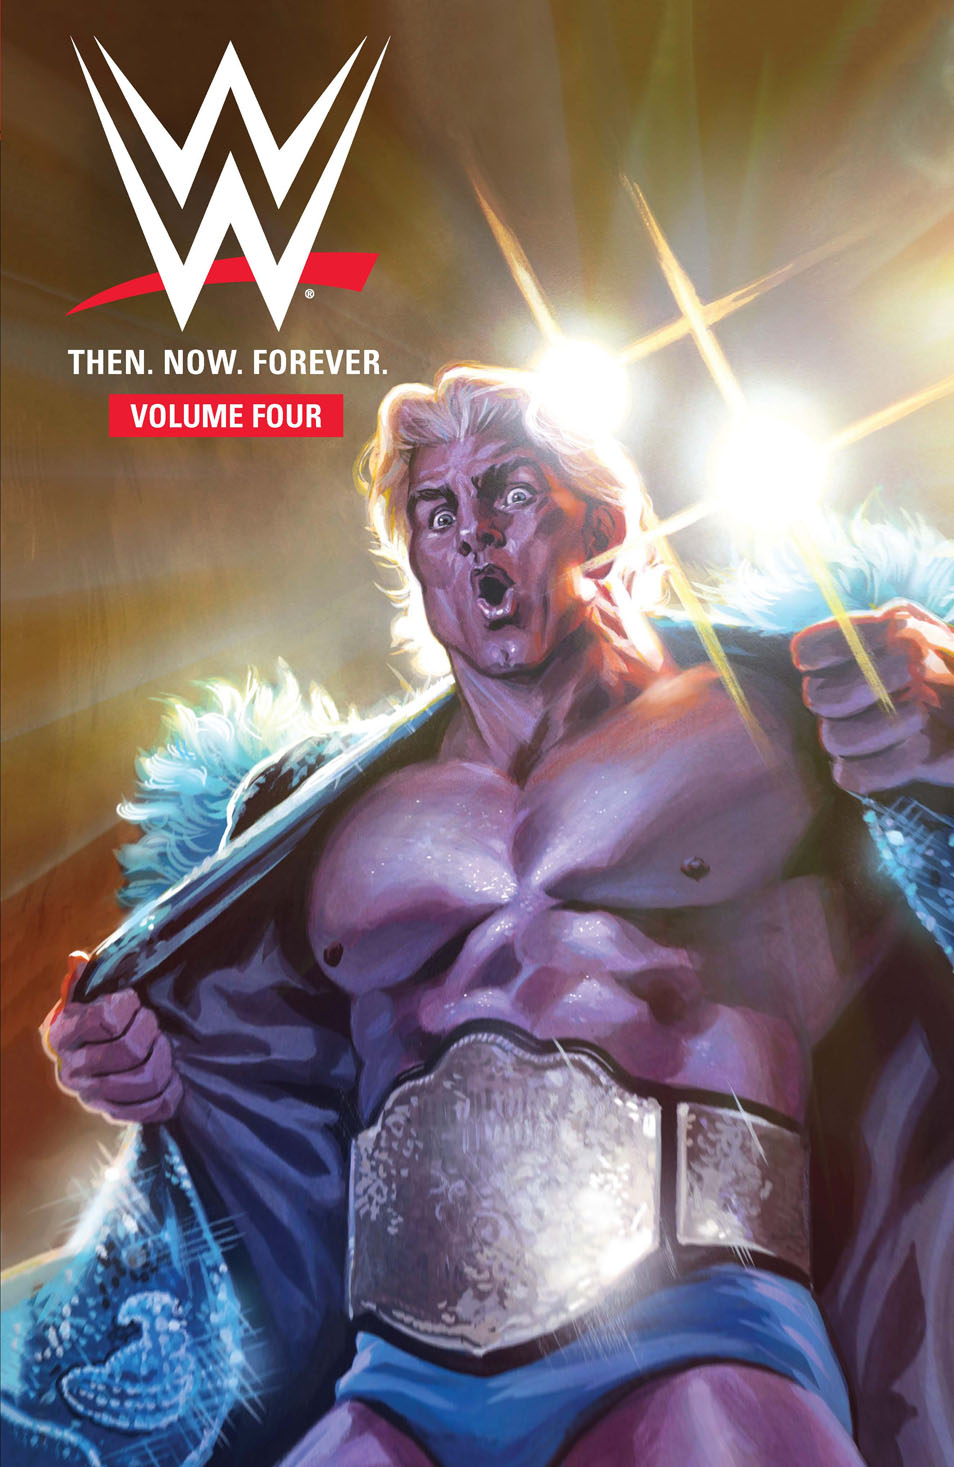 This image is the cover for the book WWE Then Now Forever Vol. 4, WWE